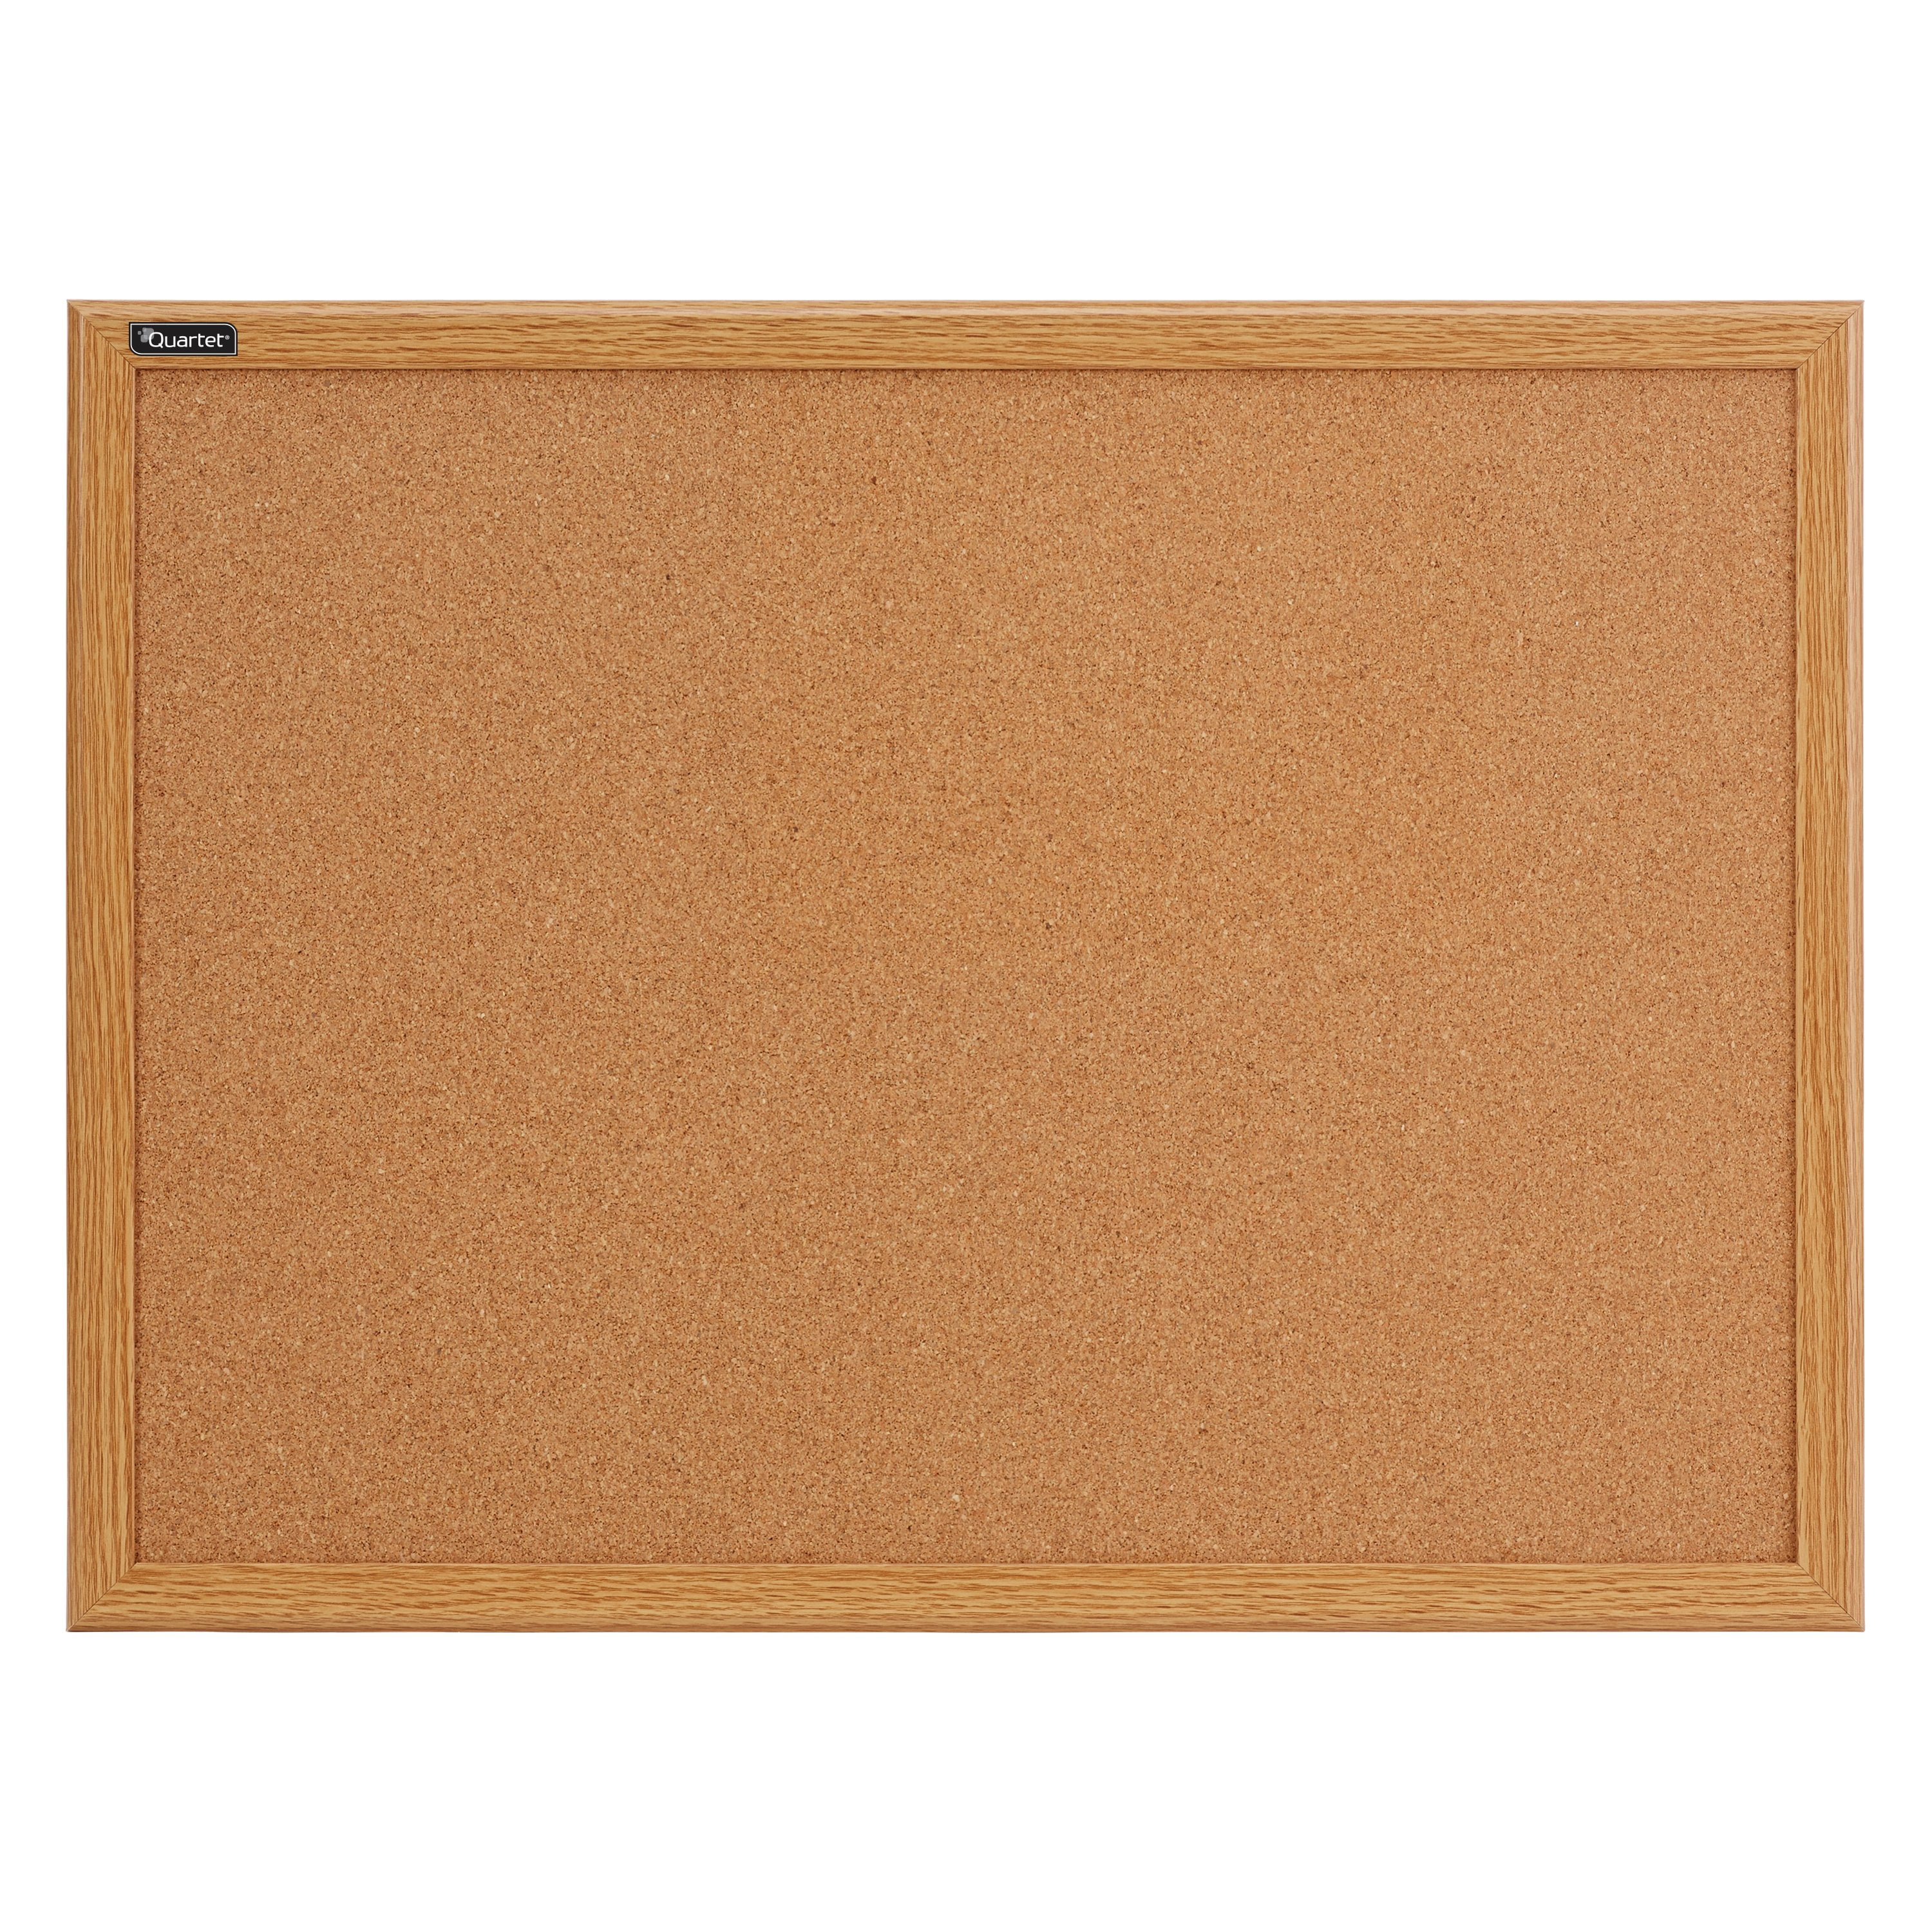 Cork Board for Office Cubicle school from Aluminum Frame and self-healing cork 